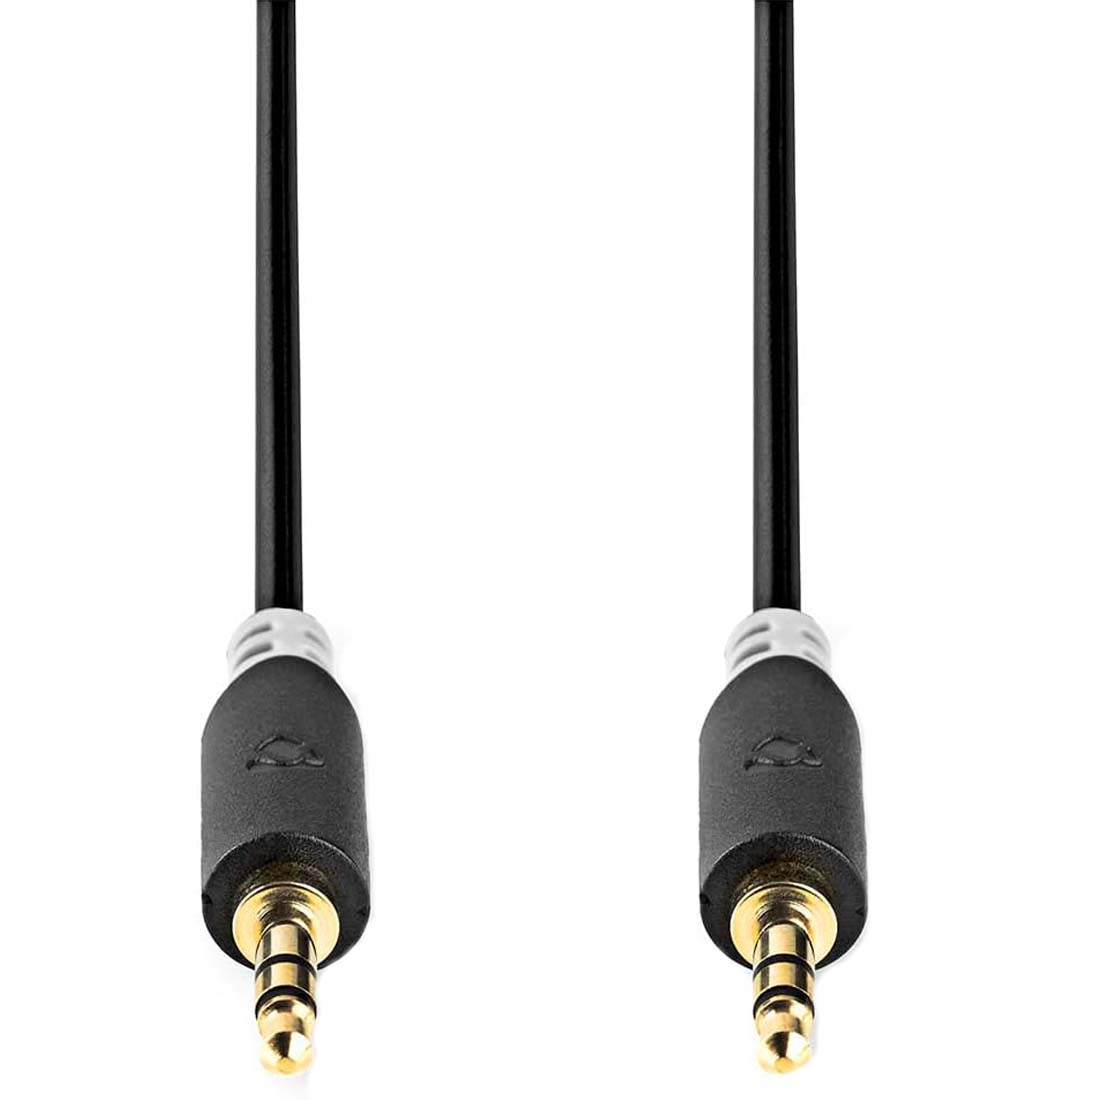 NEDIS Stereo Audio Cable, Male to Male 3.5mm Audio Cable, 3.5mm Jack Audio Cable